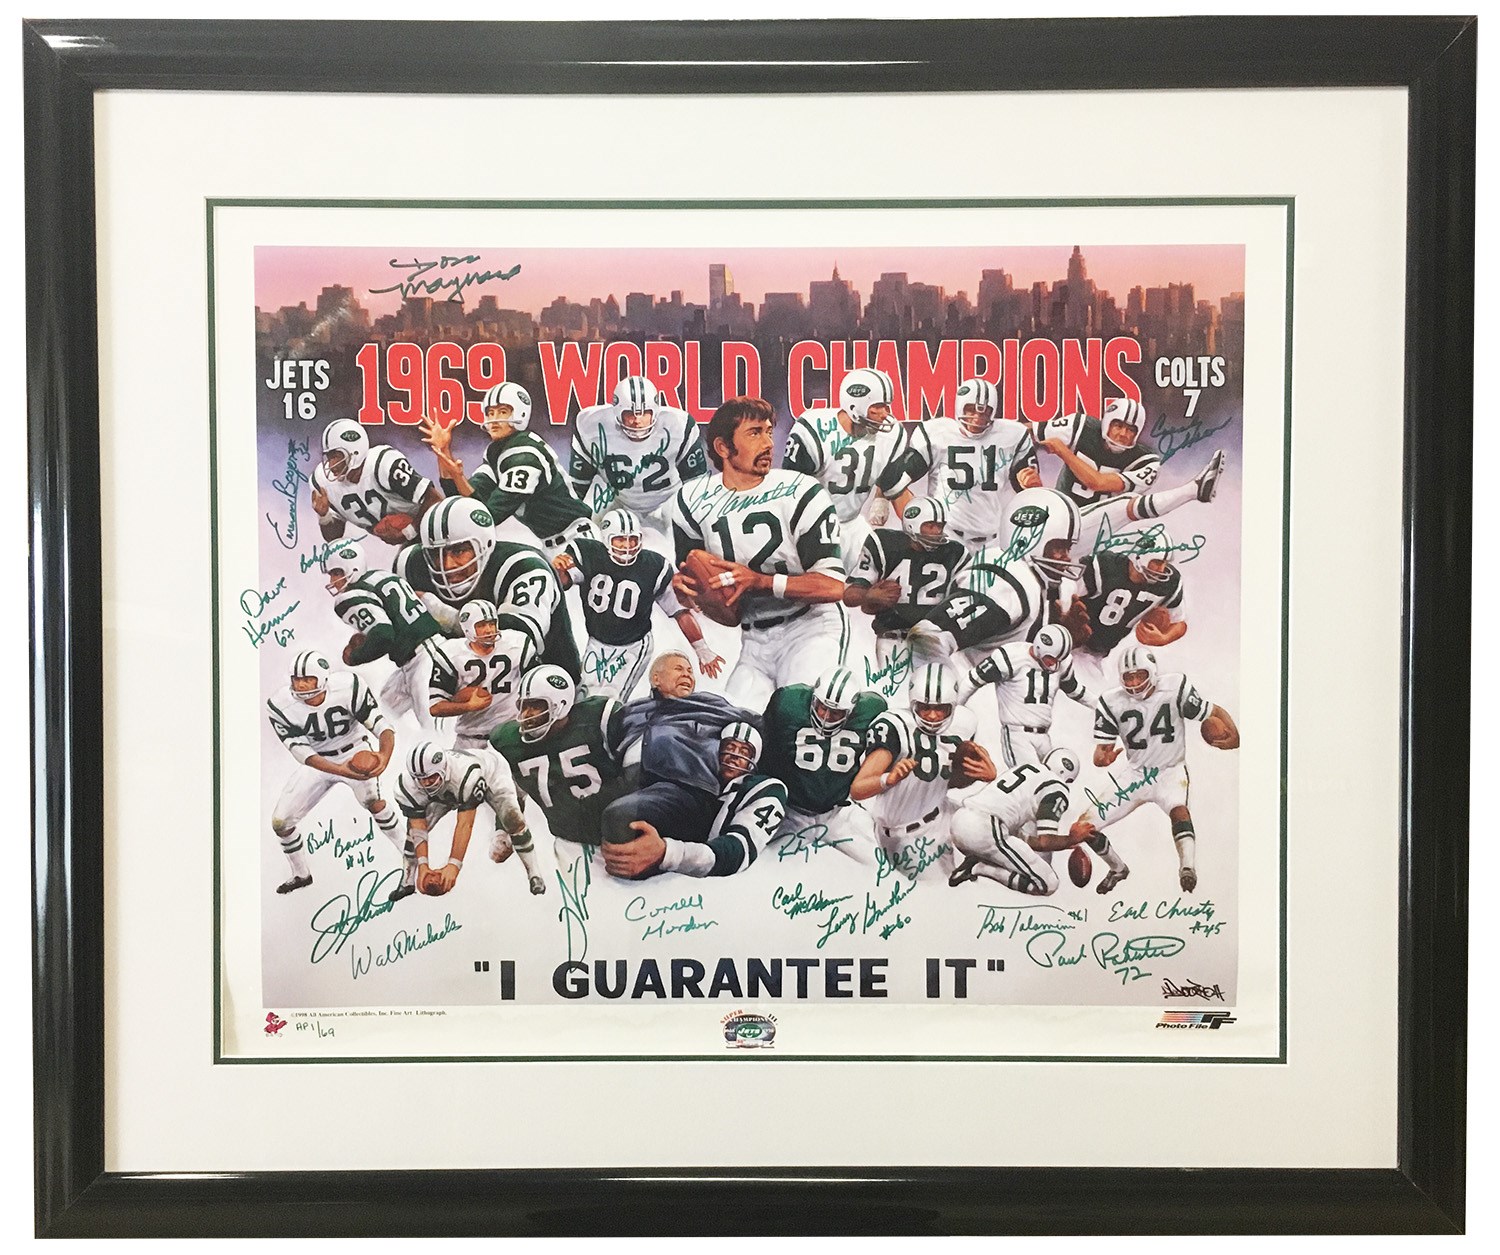 Football - 1969 Super Bowl Champion NY Jets Team Signed Lithograph (AP 1/69)